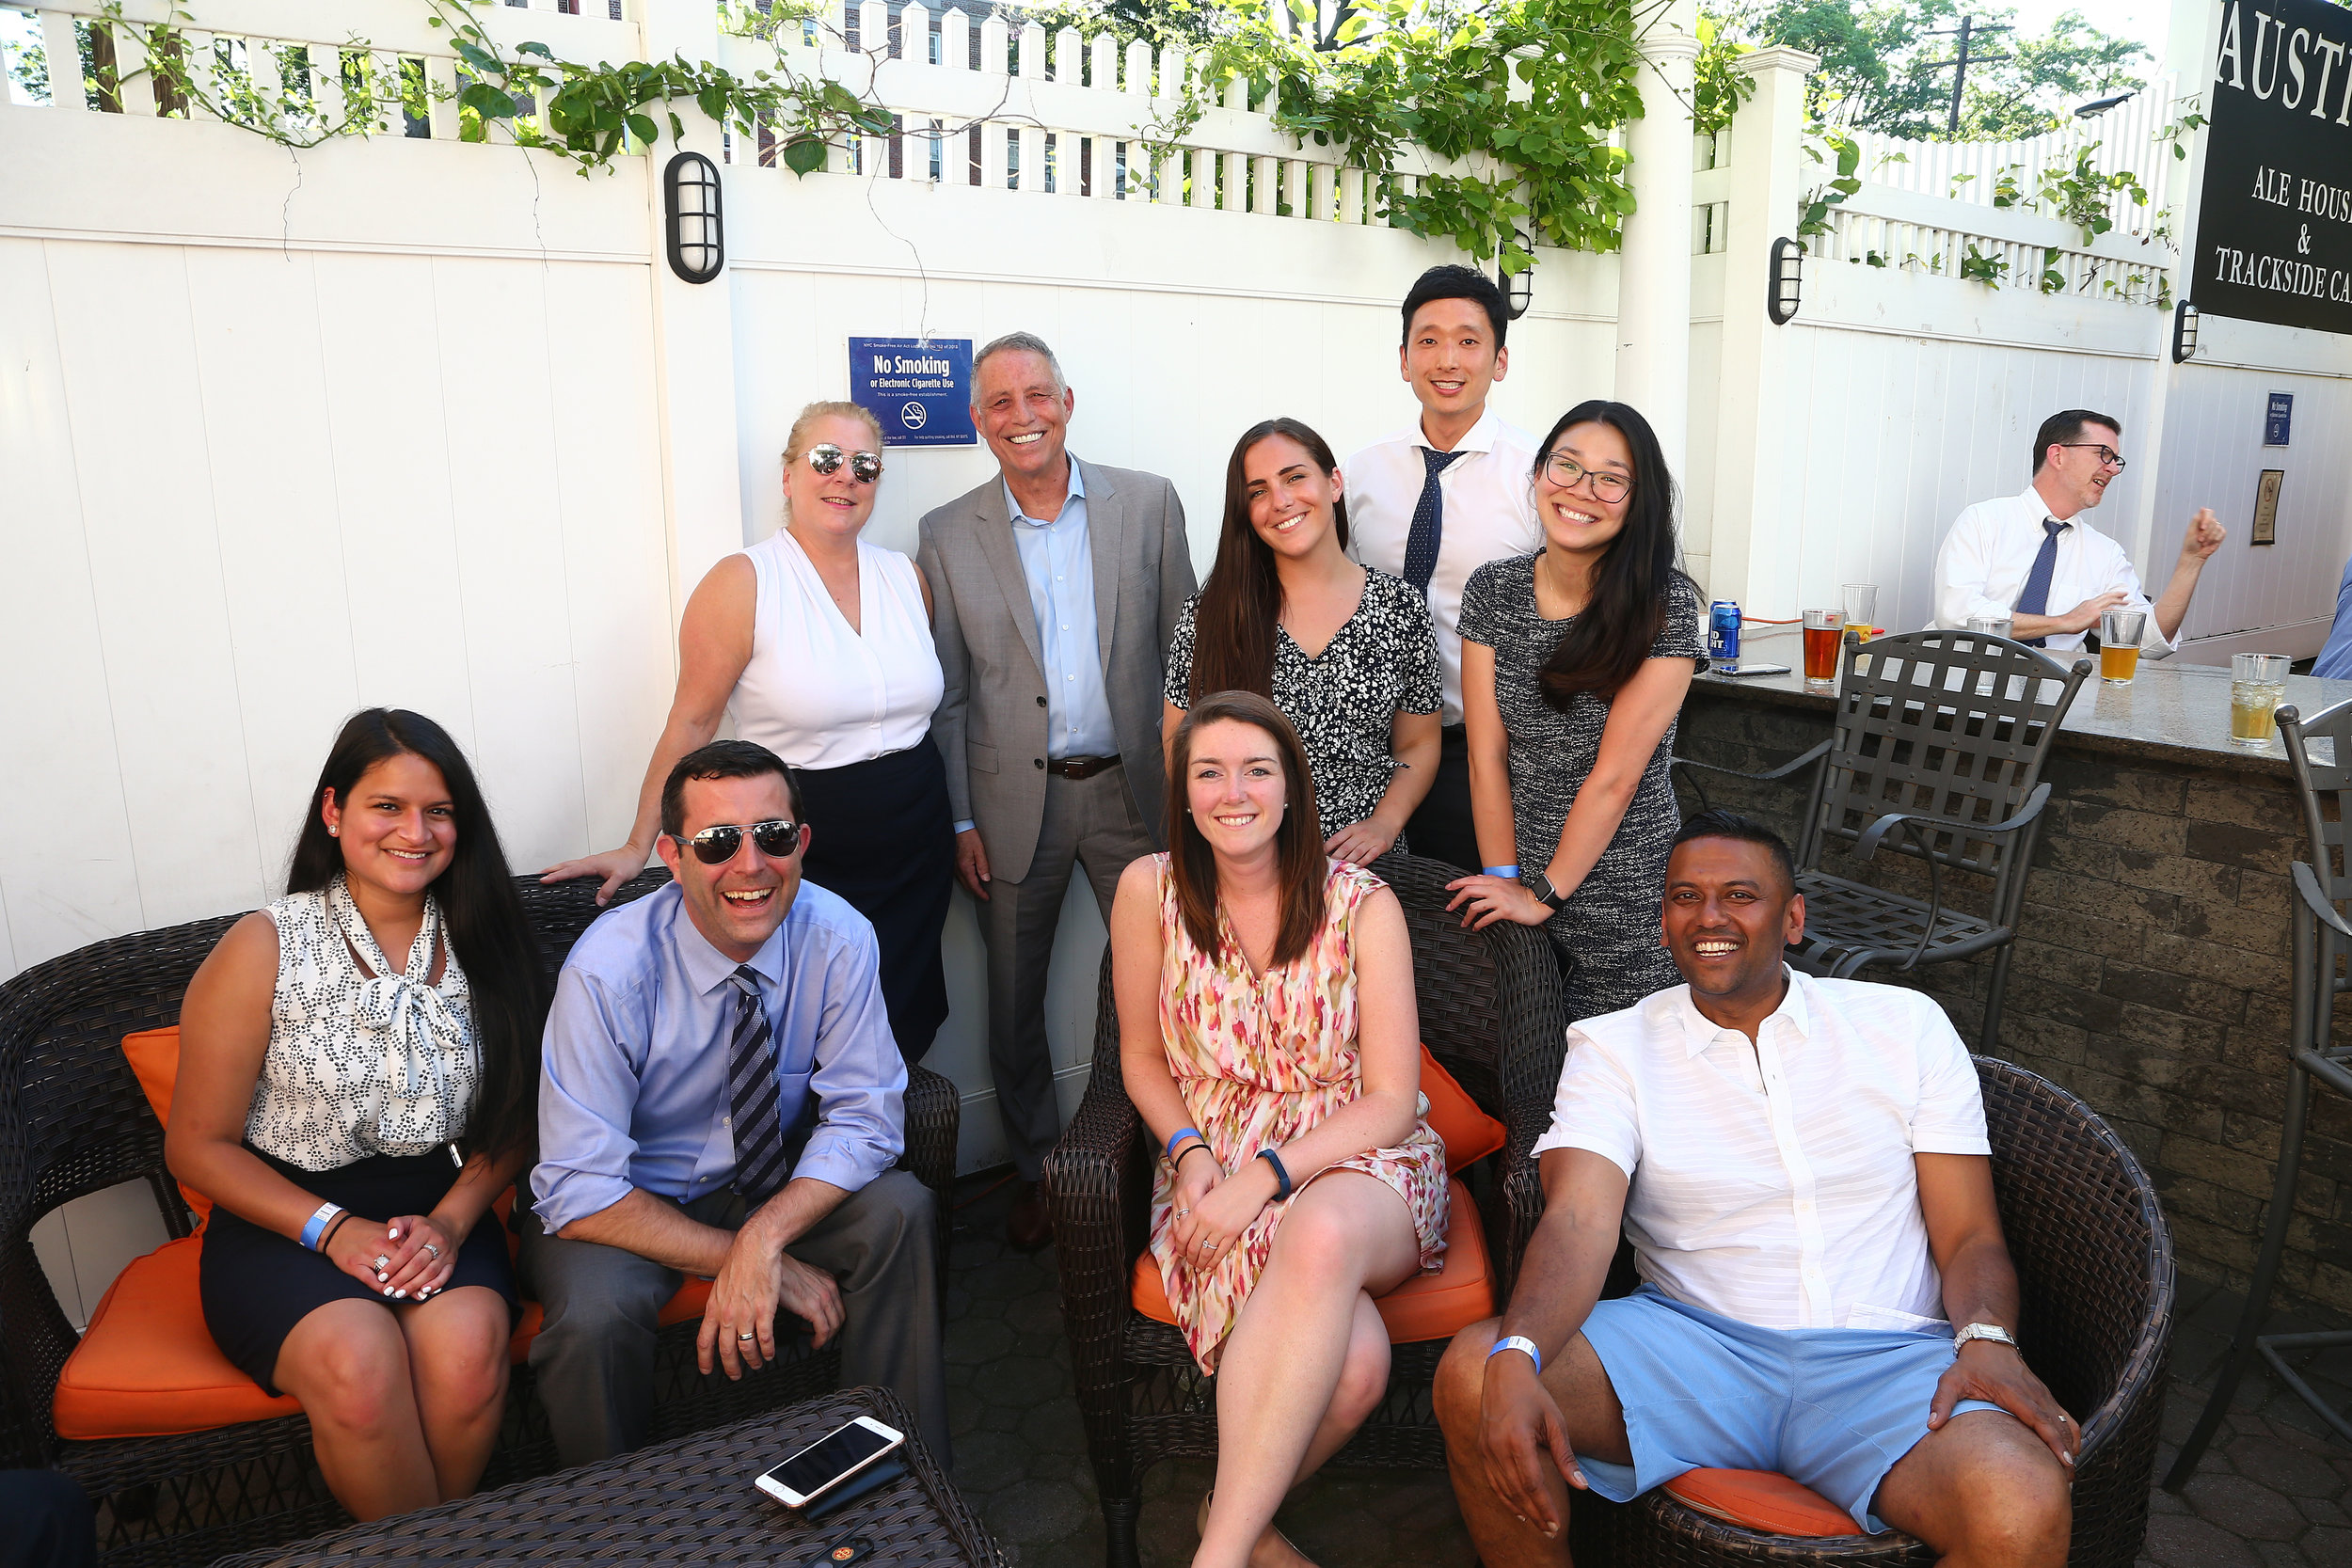  From left, Alexia Compoverde, Eugene M. Guarino, Denise Tirino, Todd Greenberg, Kaitlyn Gaskin, Rachel Houle, Christopher Bae, Michelle Yong and Simiyon Haniff.    